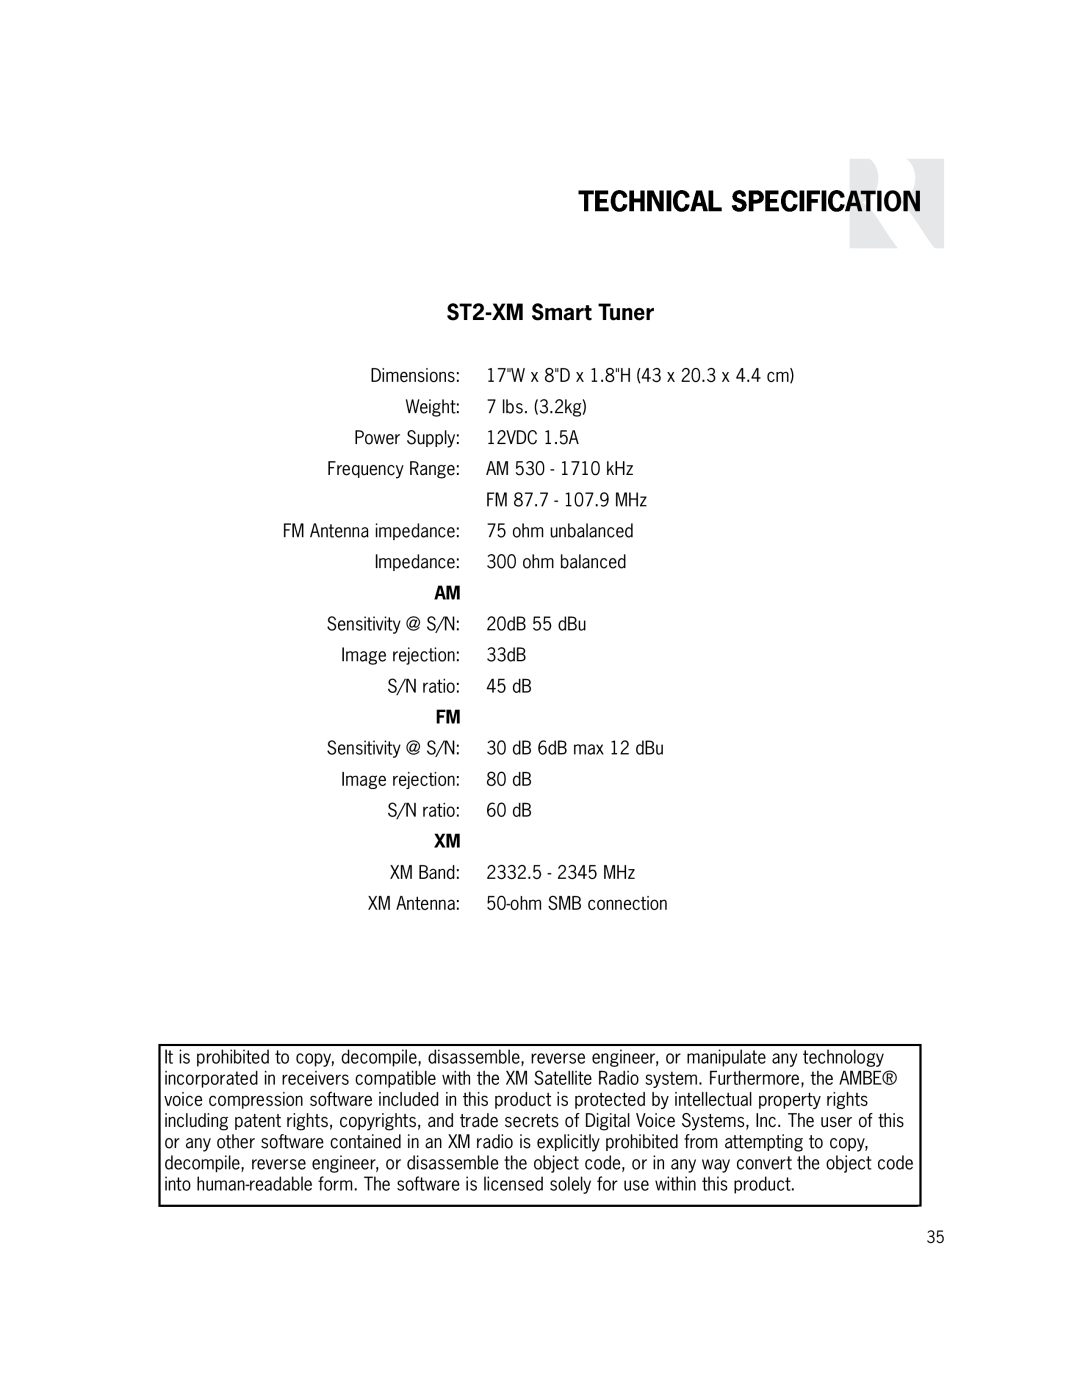 Russound manual Technical Specification, ST2-XMSmart Tuner 